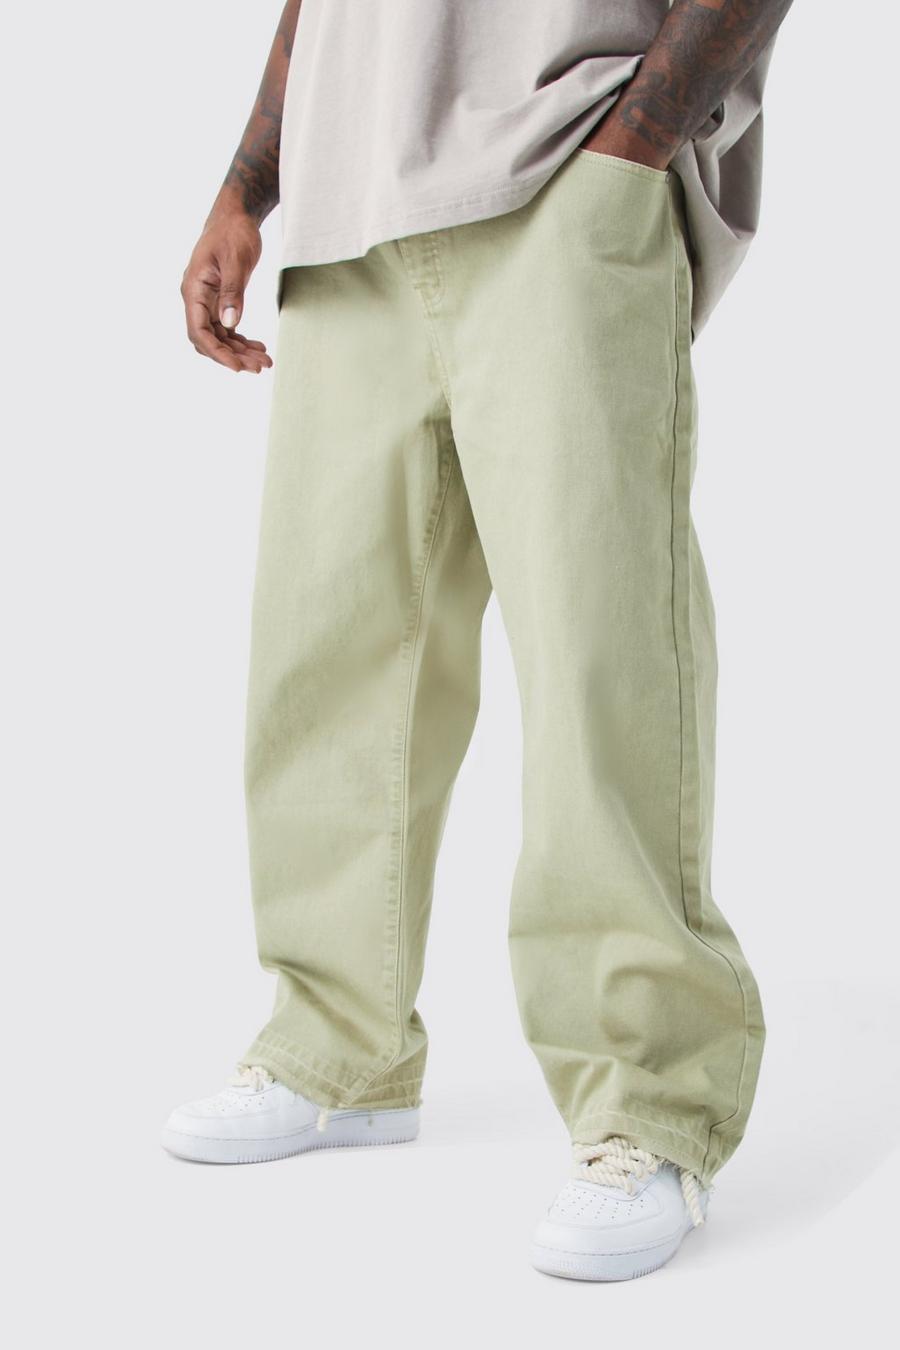 Sage vert Plus Relaxed Rigid Overdyed Let Down Hem Jeans